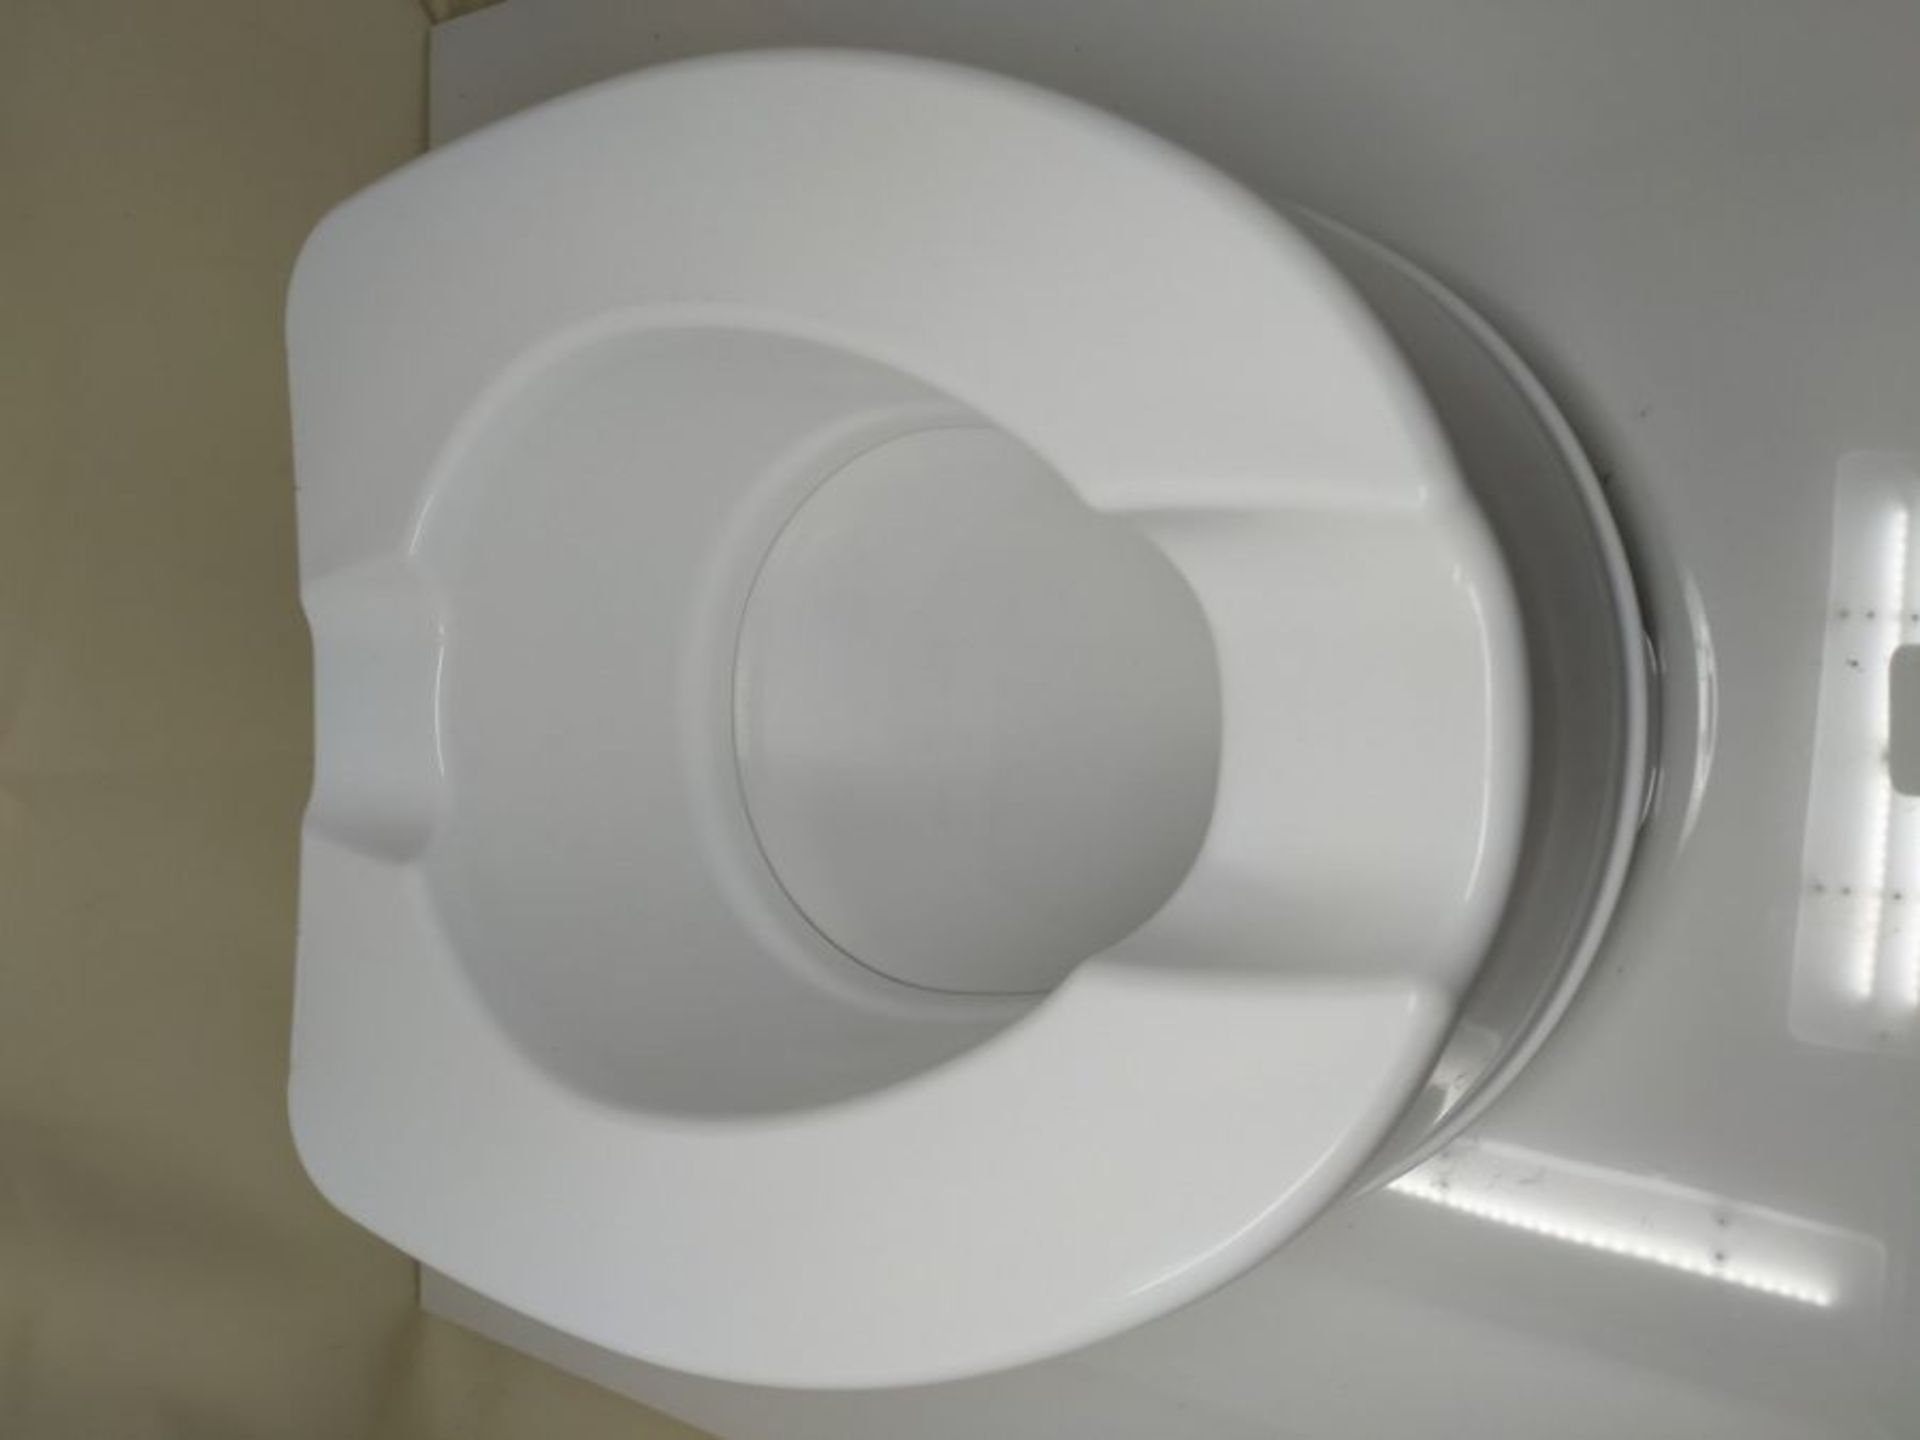 Drive 6 Inch Raised Toilet Seat without Lid - Image 2 of 2